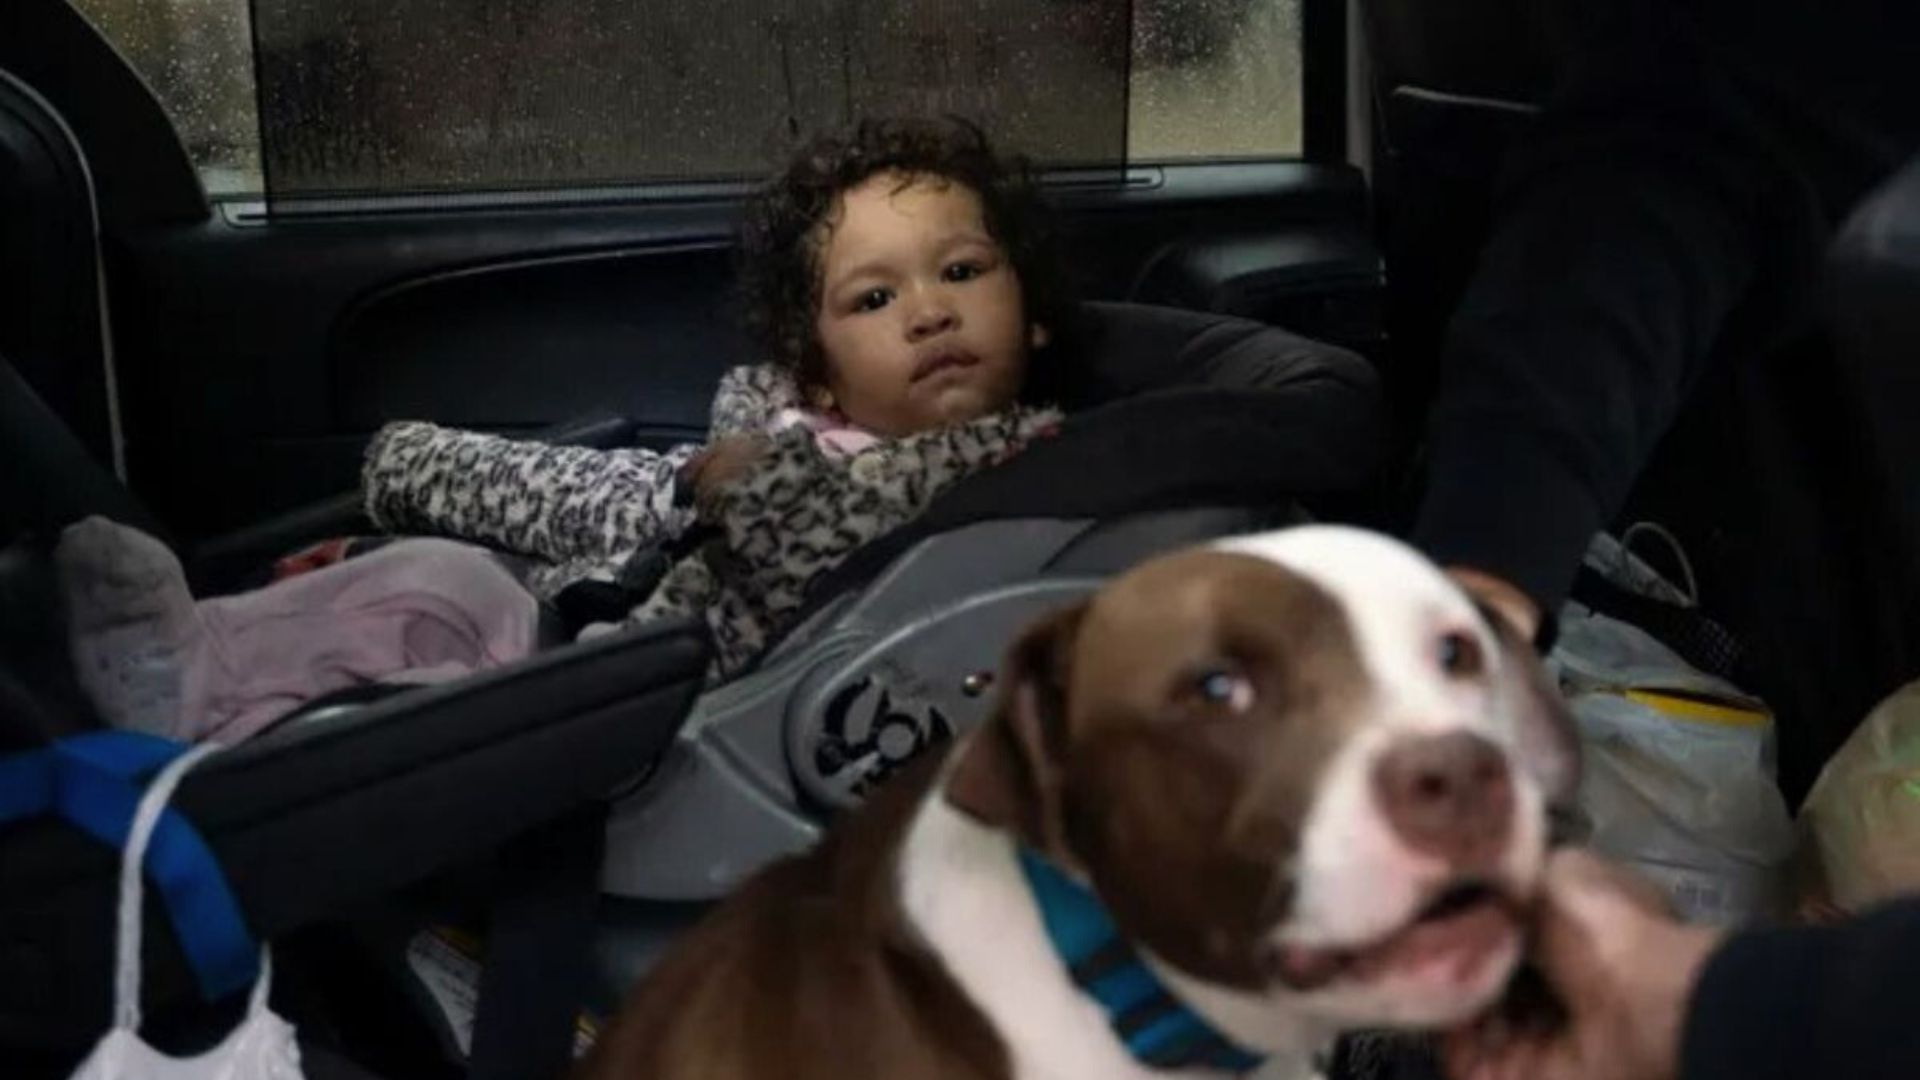 Hero Dog Wasn’t Willing To Leave The House Without 1-Year-Old Girl, Ultimately Saving Her From Fire